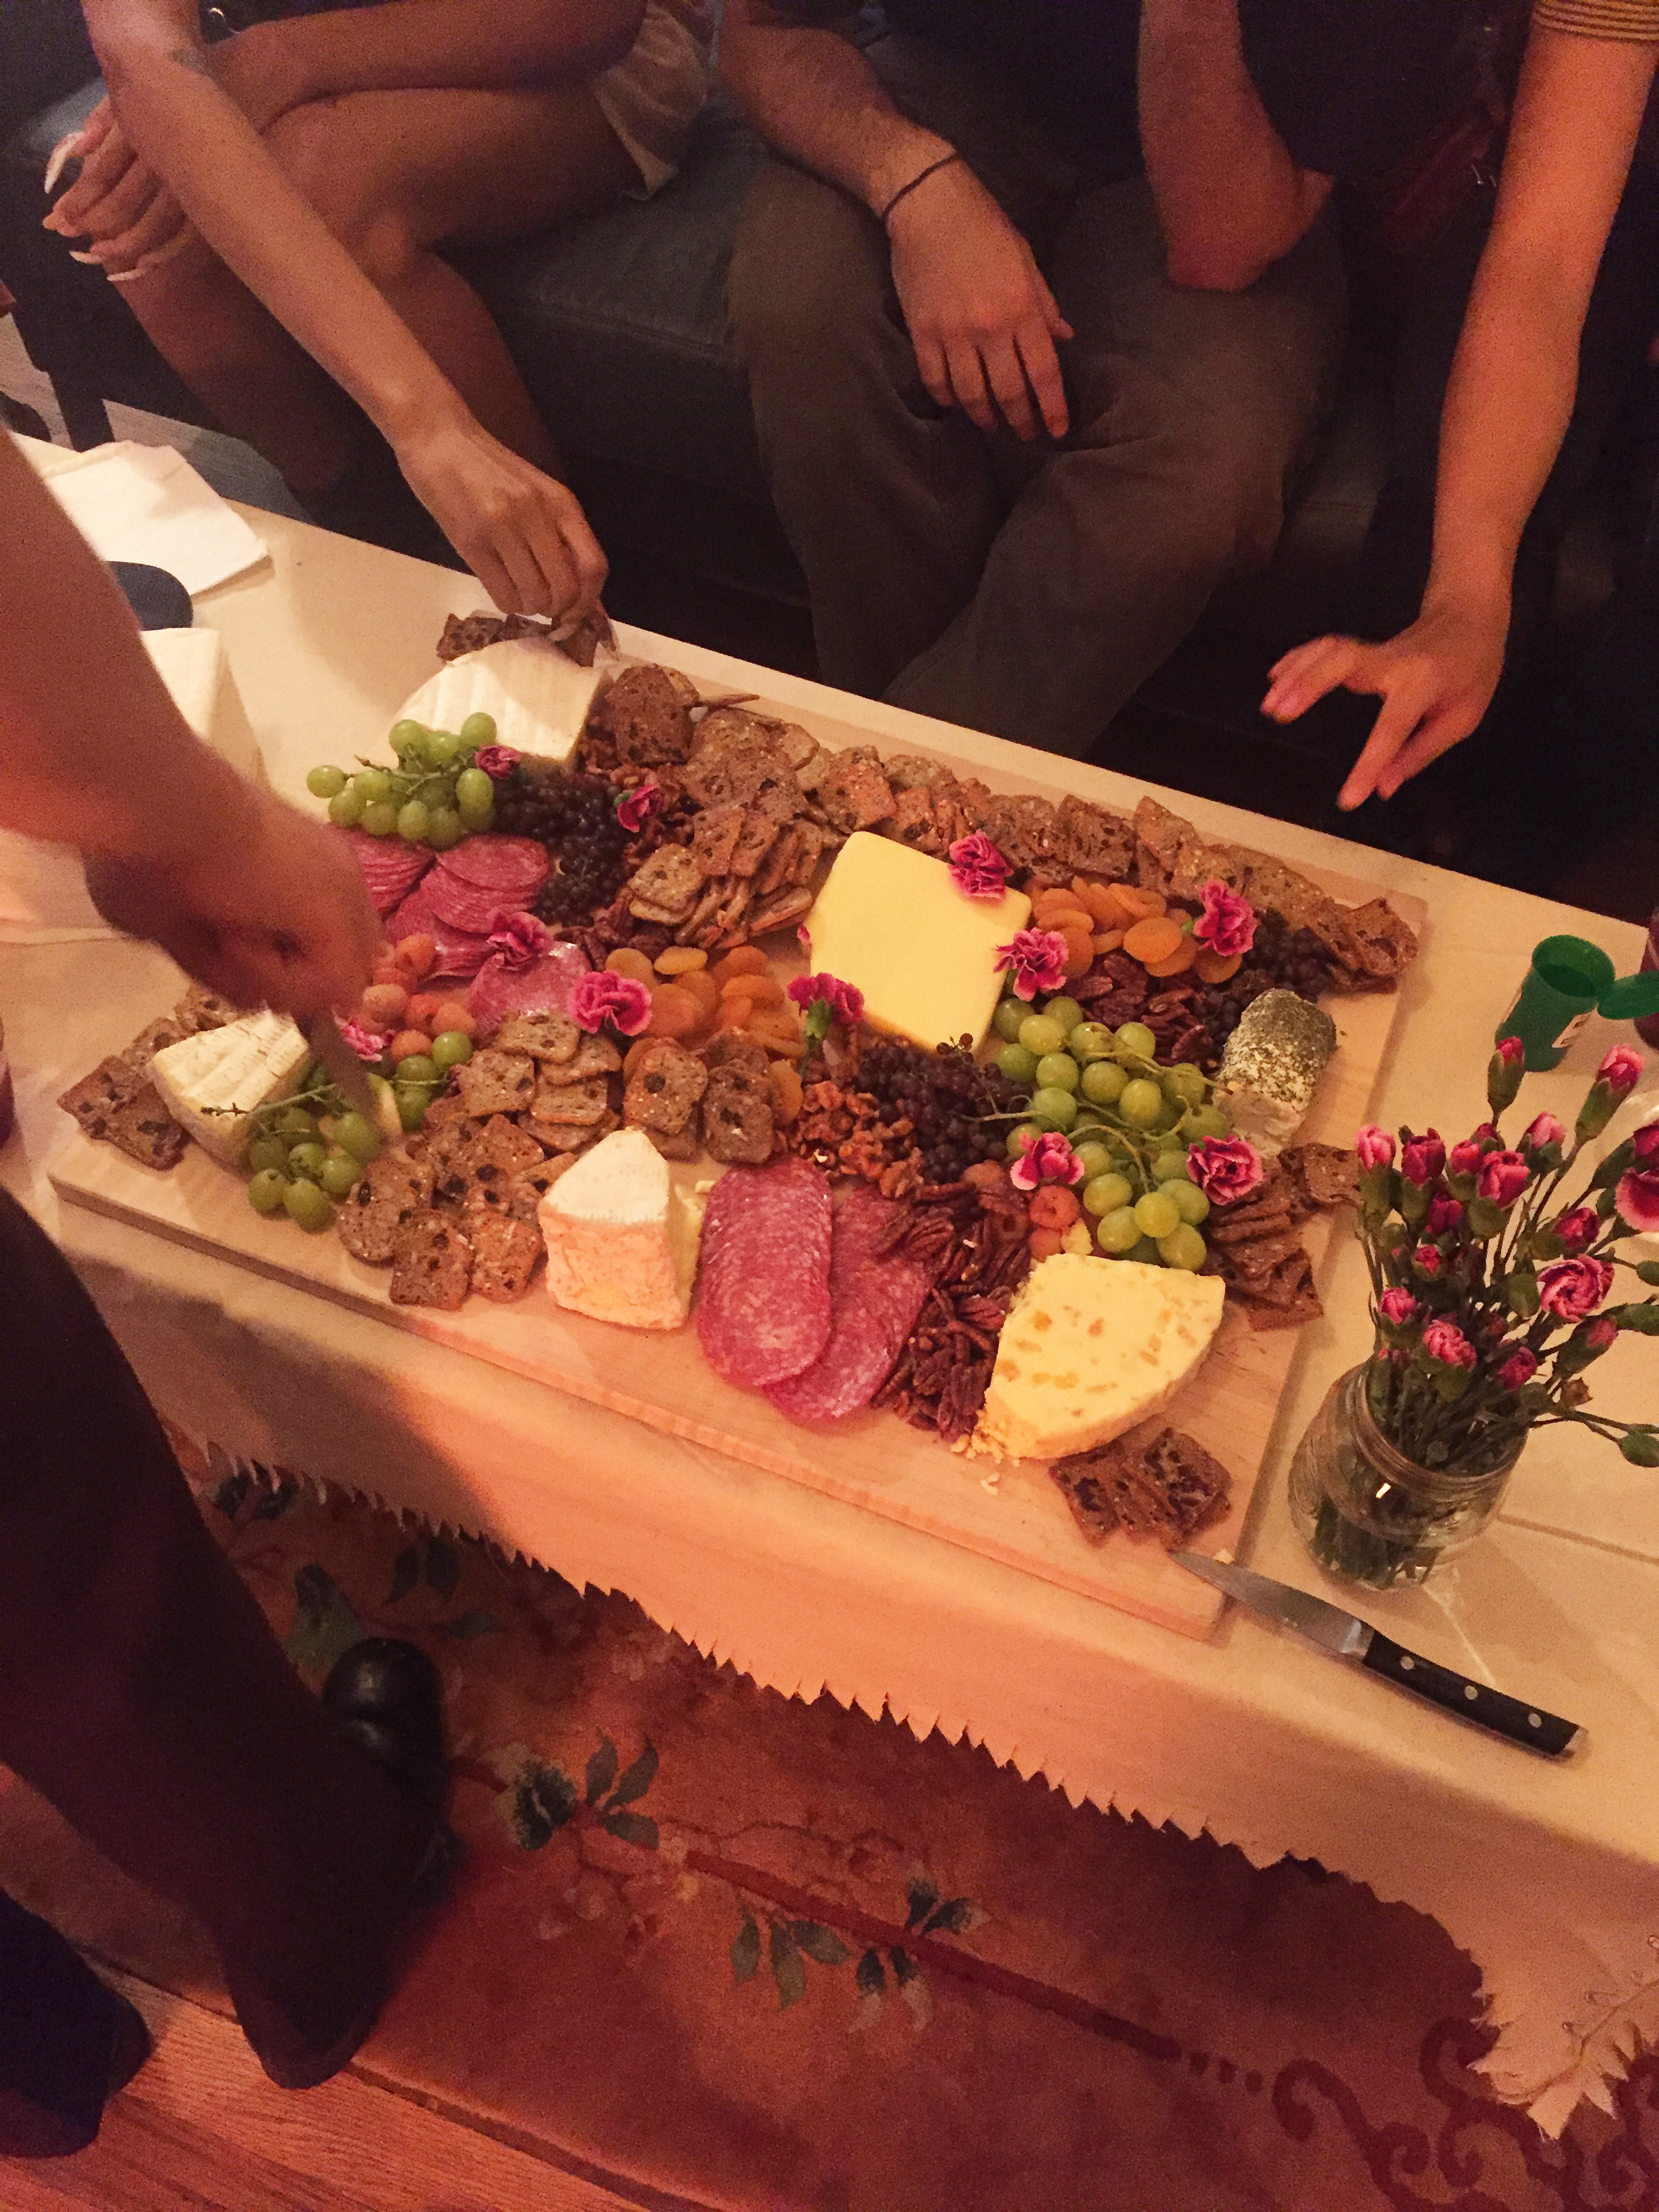 Hands reaching for a charcuterie board on a low coffee table